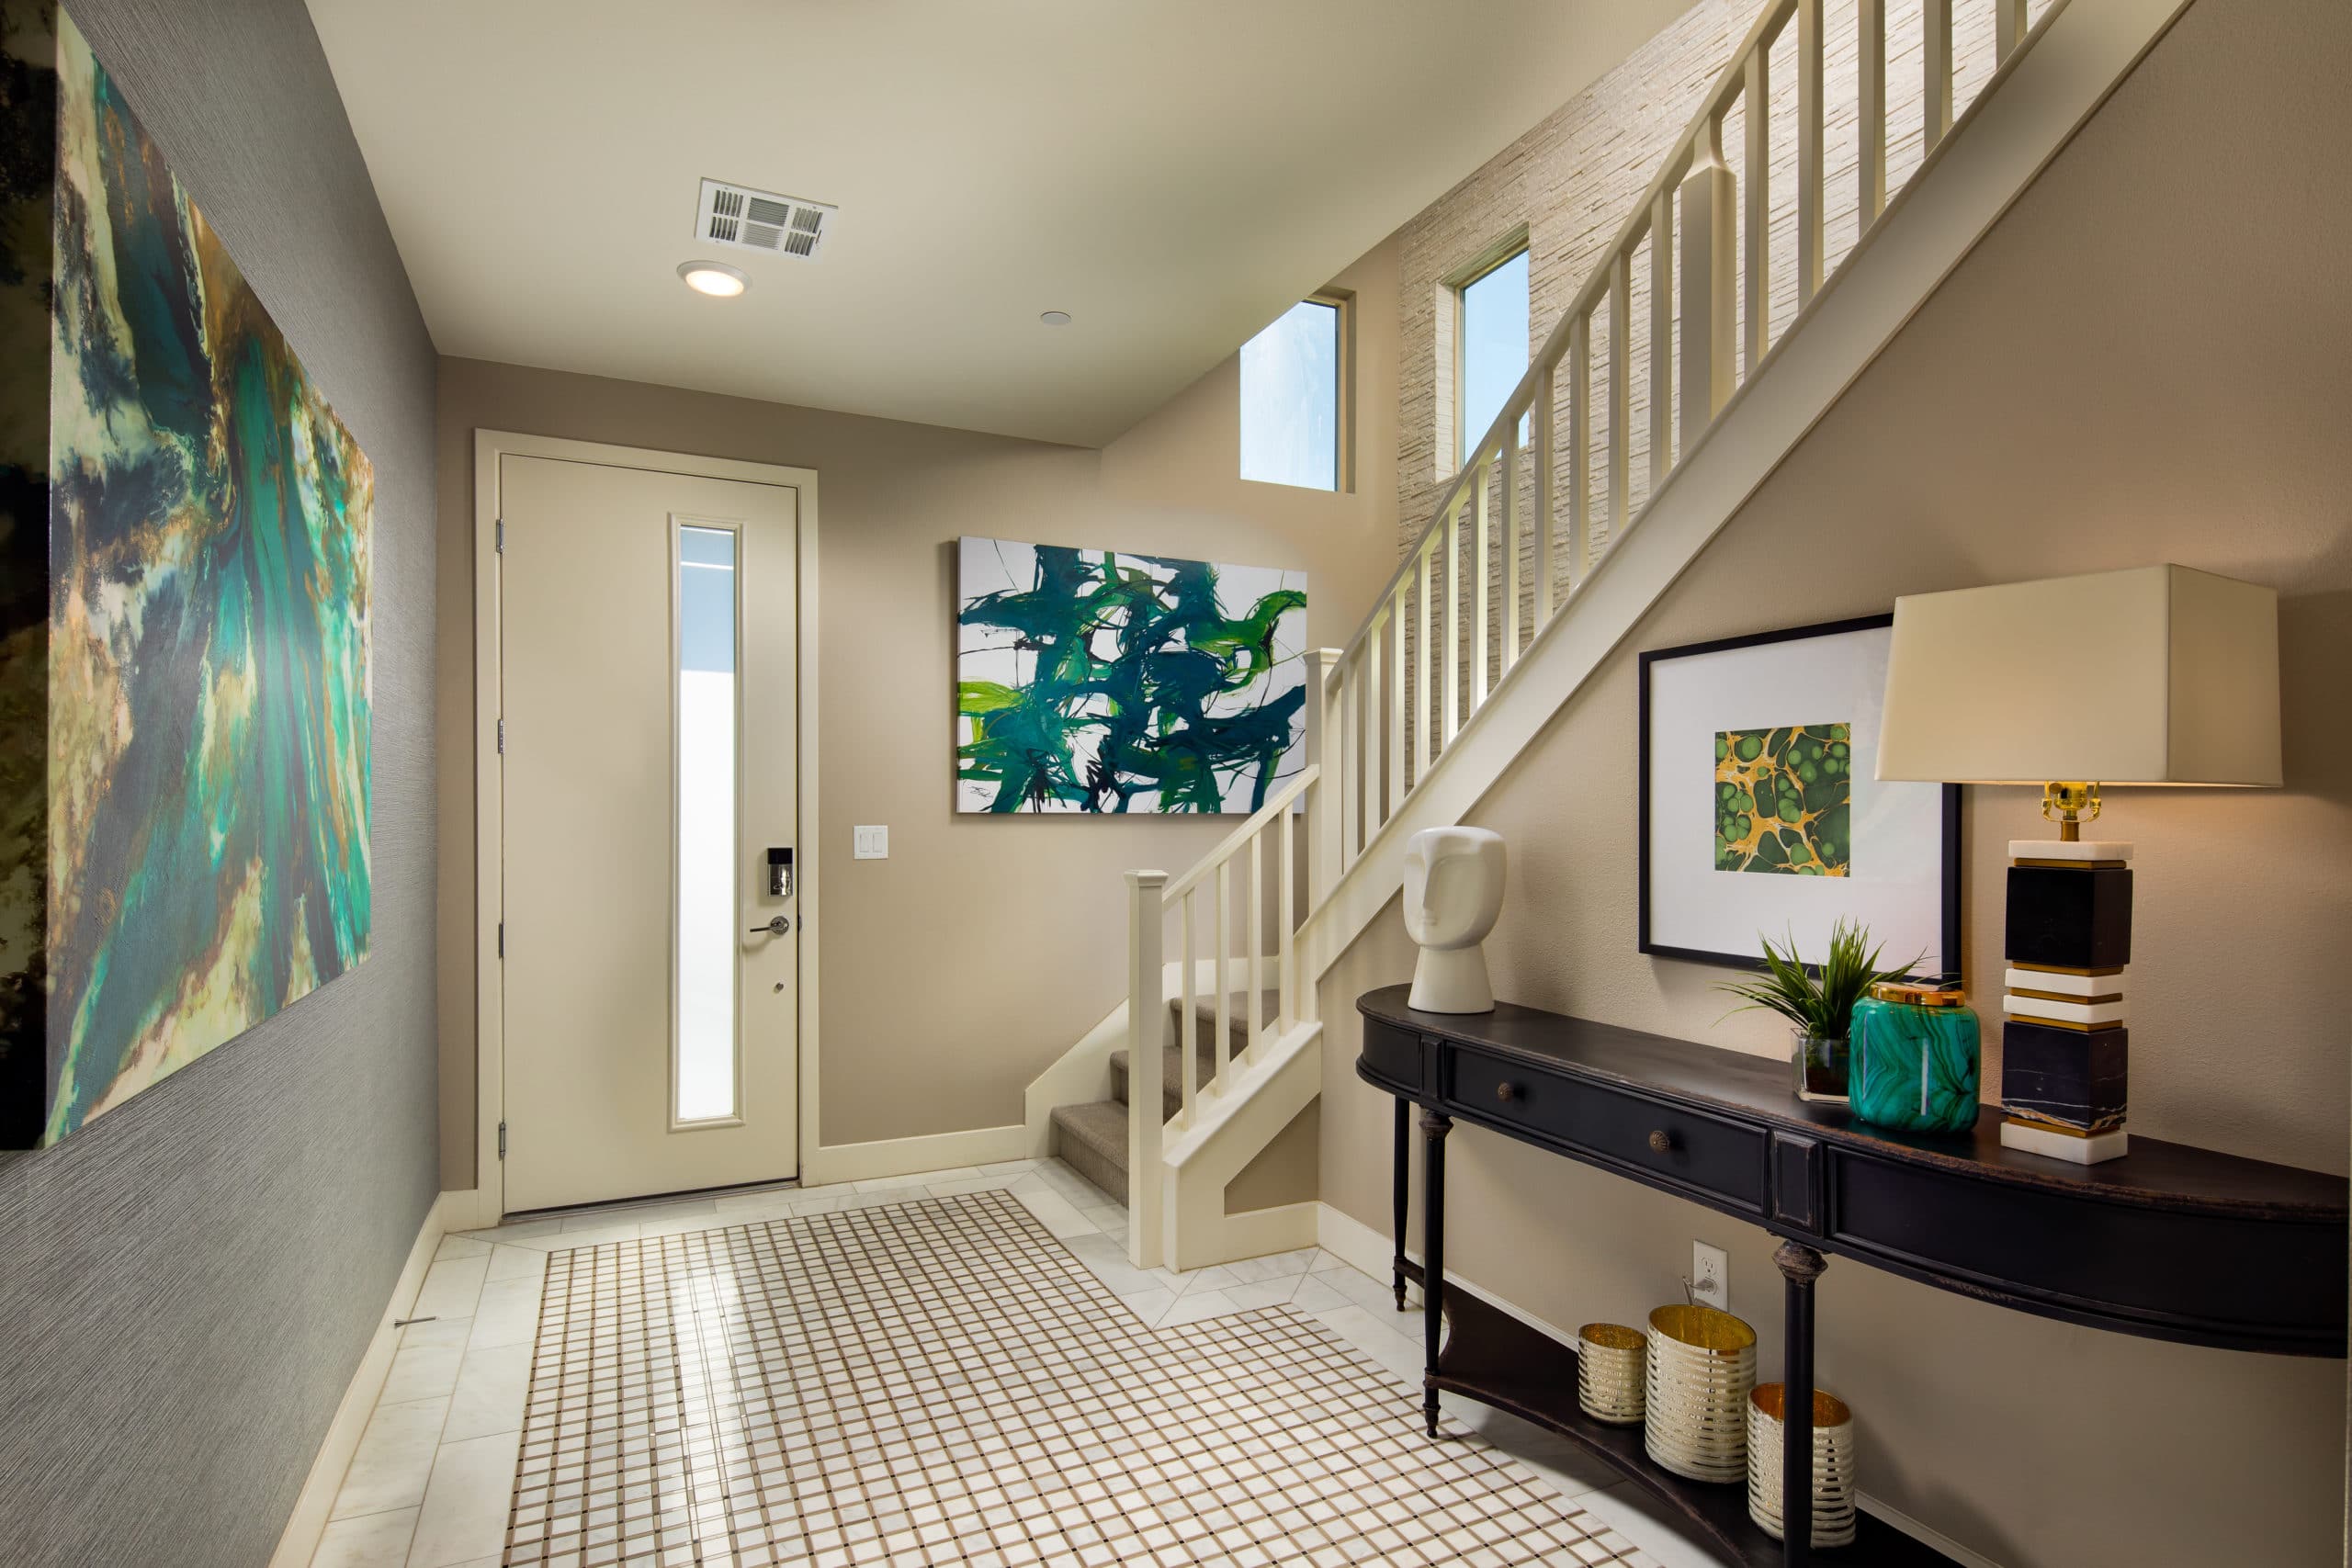 Entry in Viewpoint Model in Modern Collection in Trilogy by Shea Homes in South Square in Summerlin